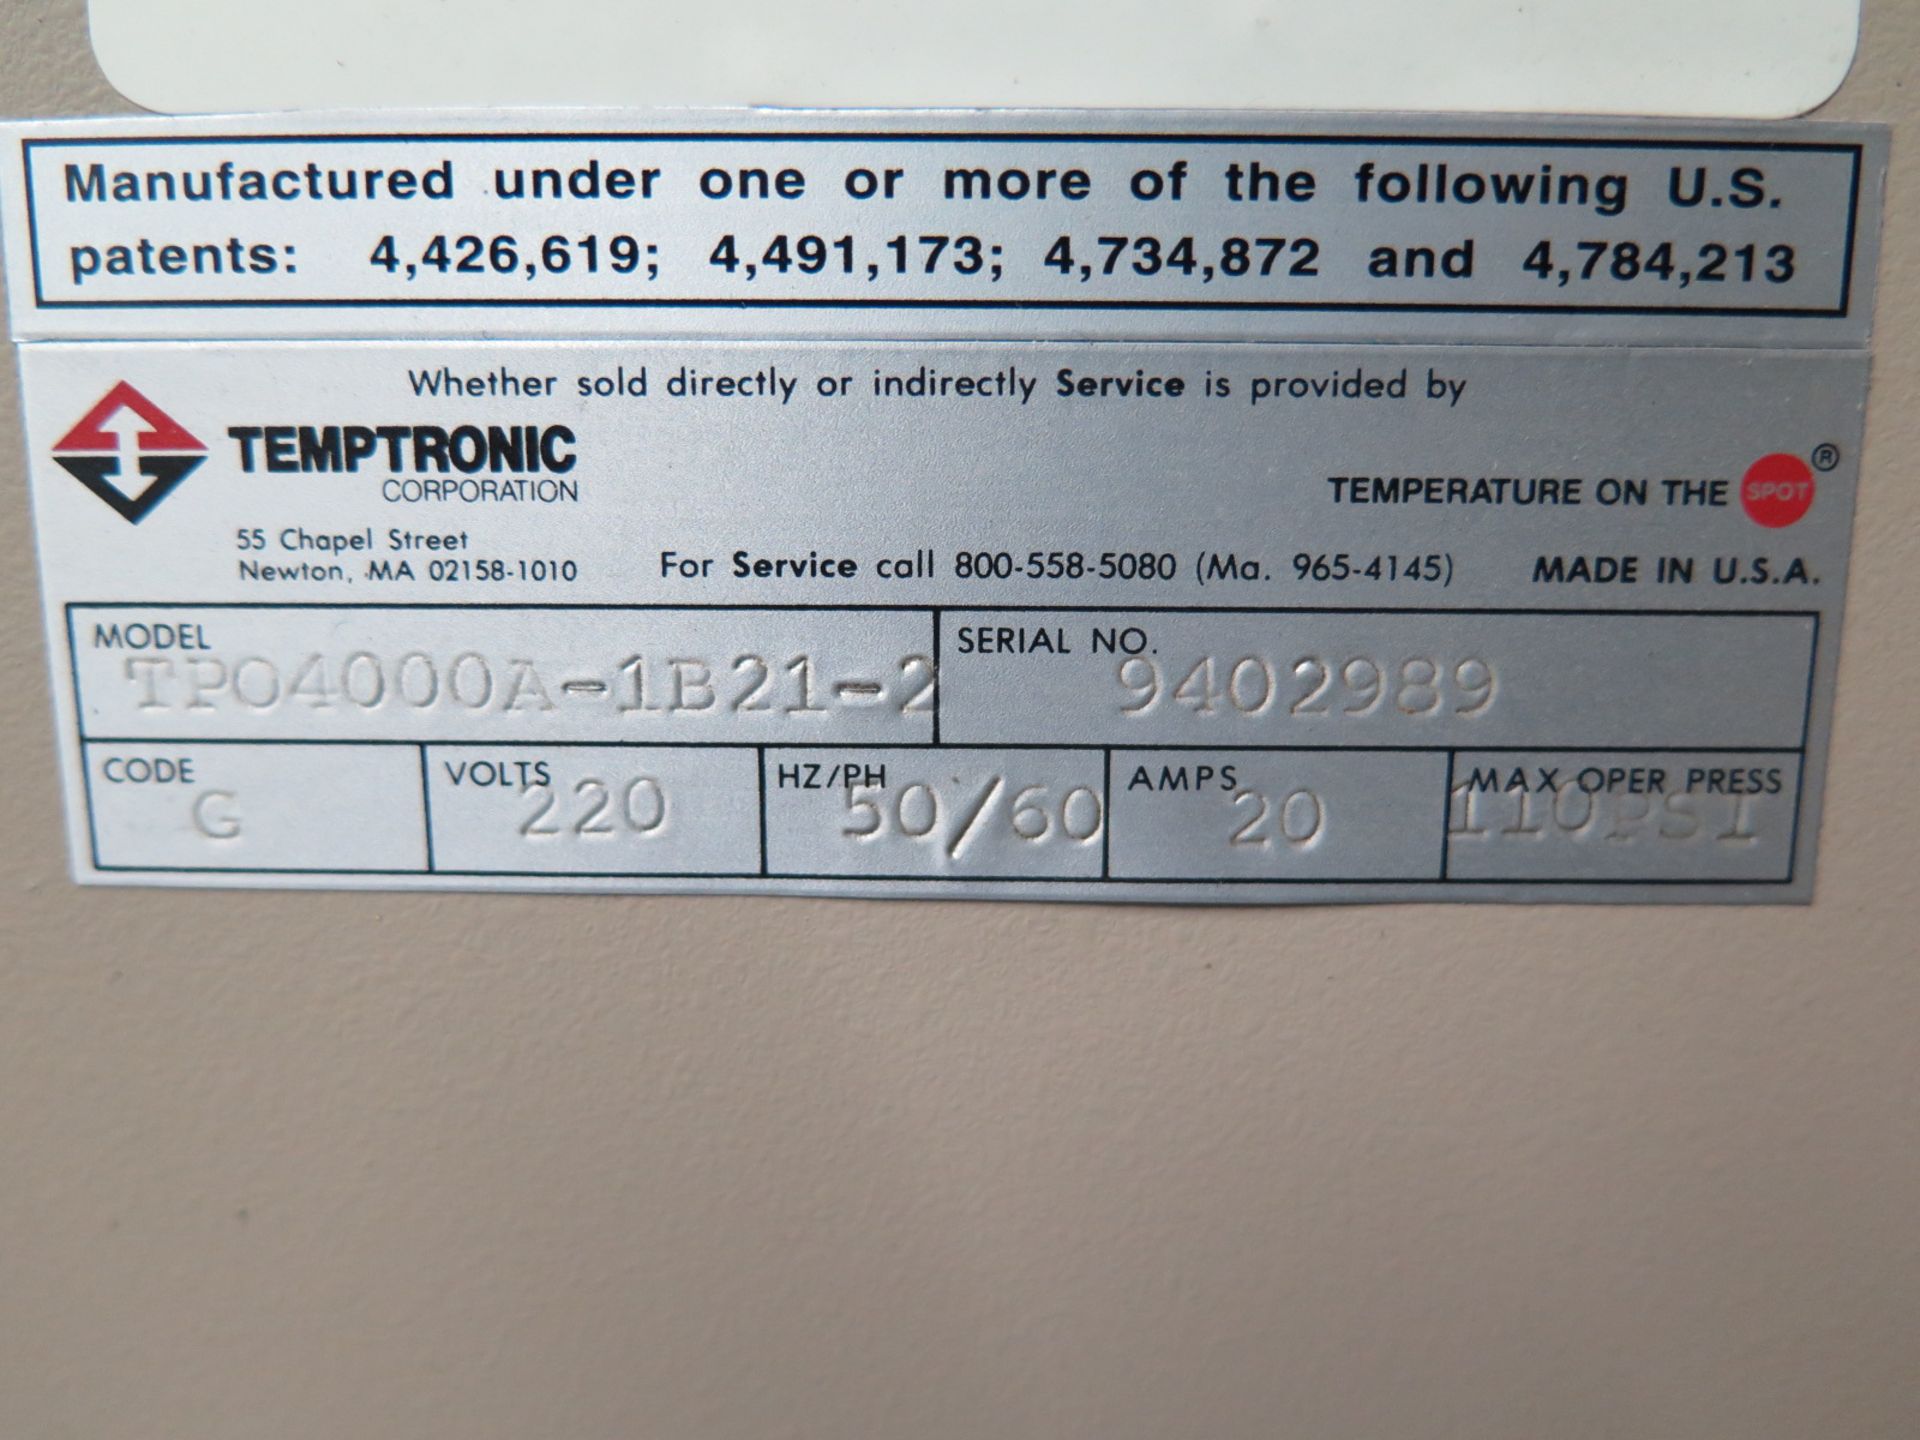 Temptronic ThermoStream mdl. TP-04000A-2B21-1 Temperature Forcing Thermostream System s/n 9402989 - Image 7 of 7